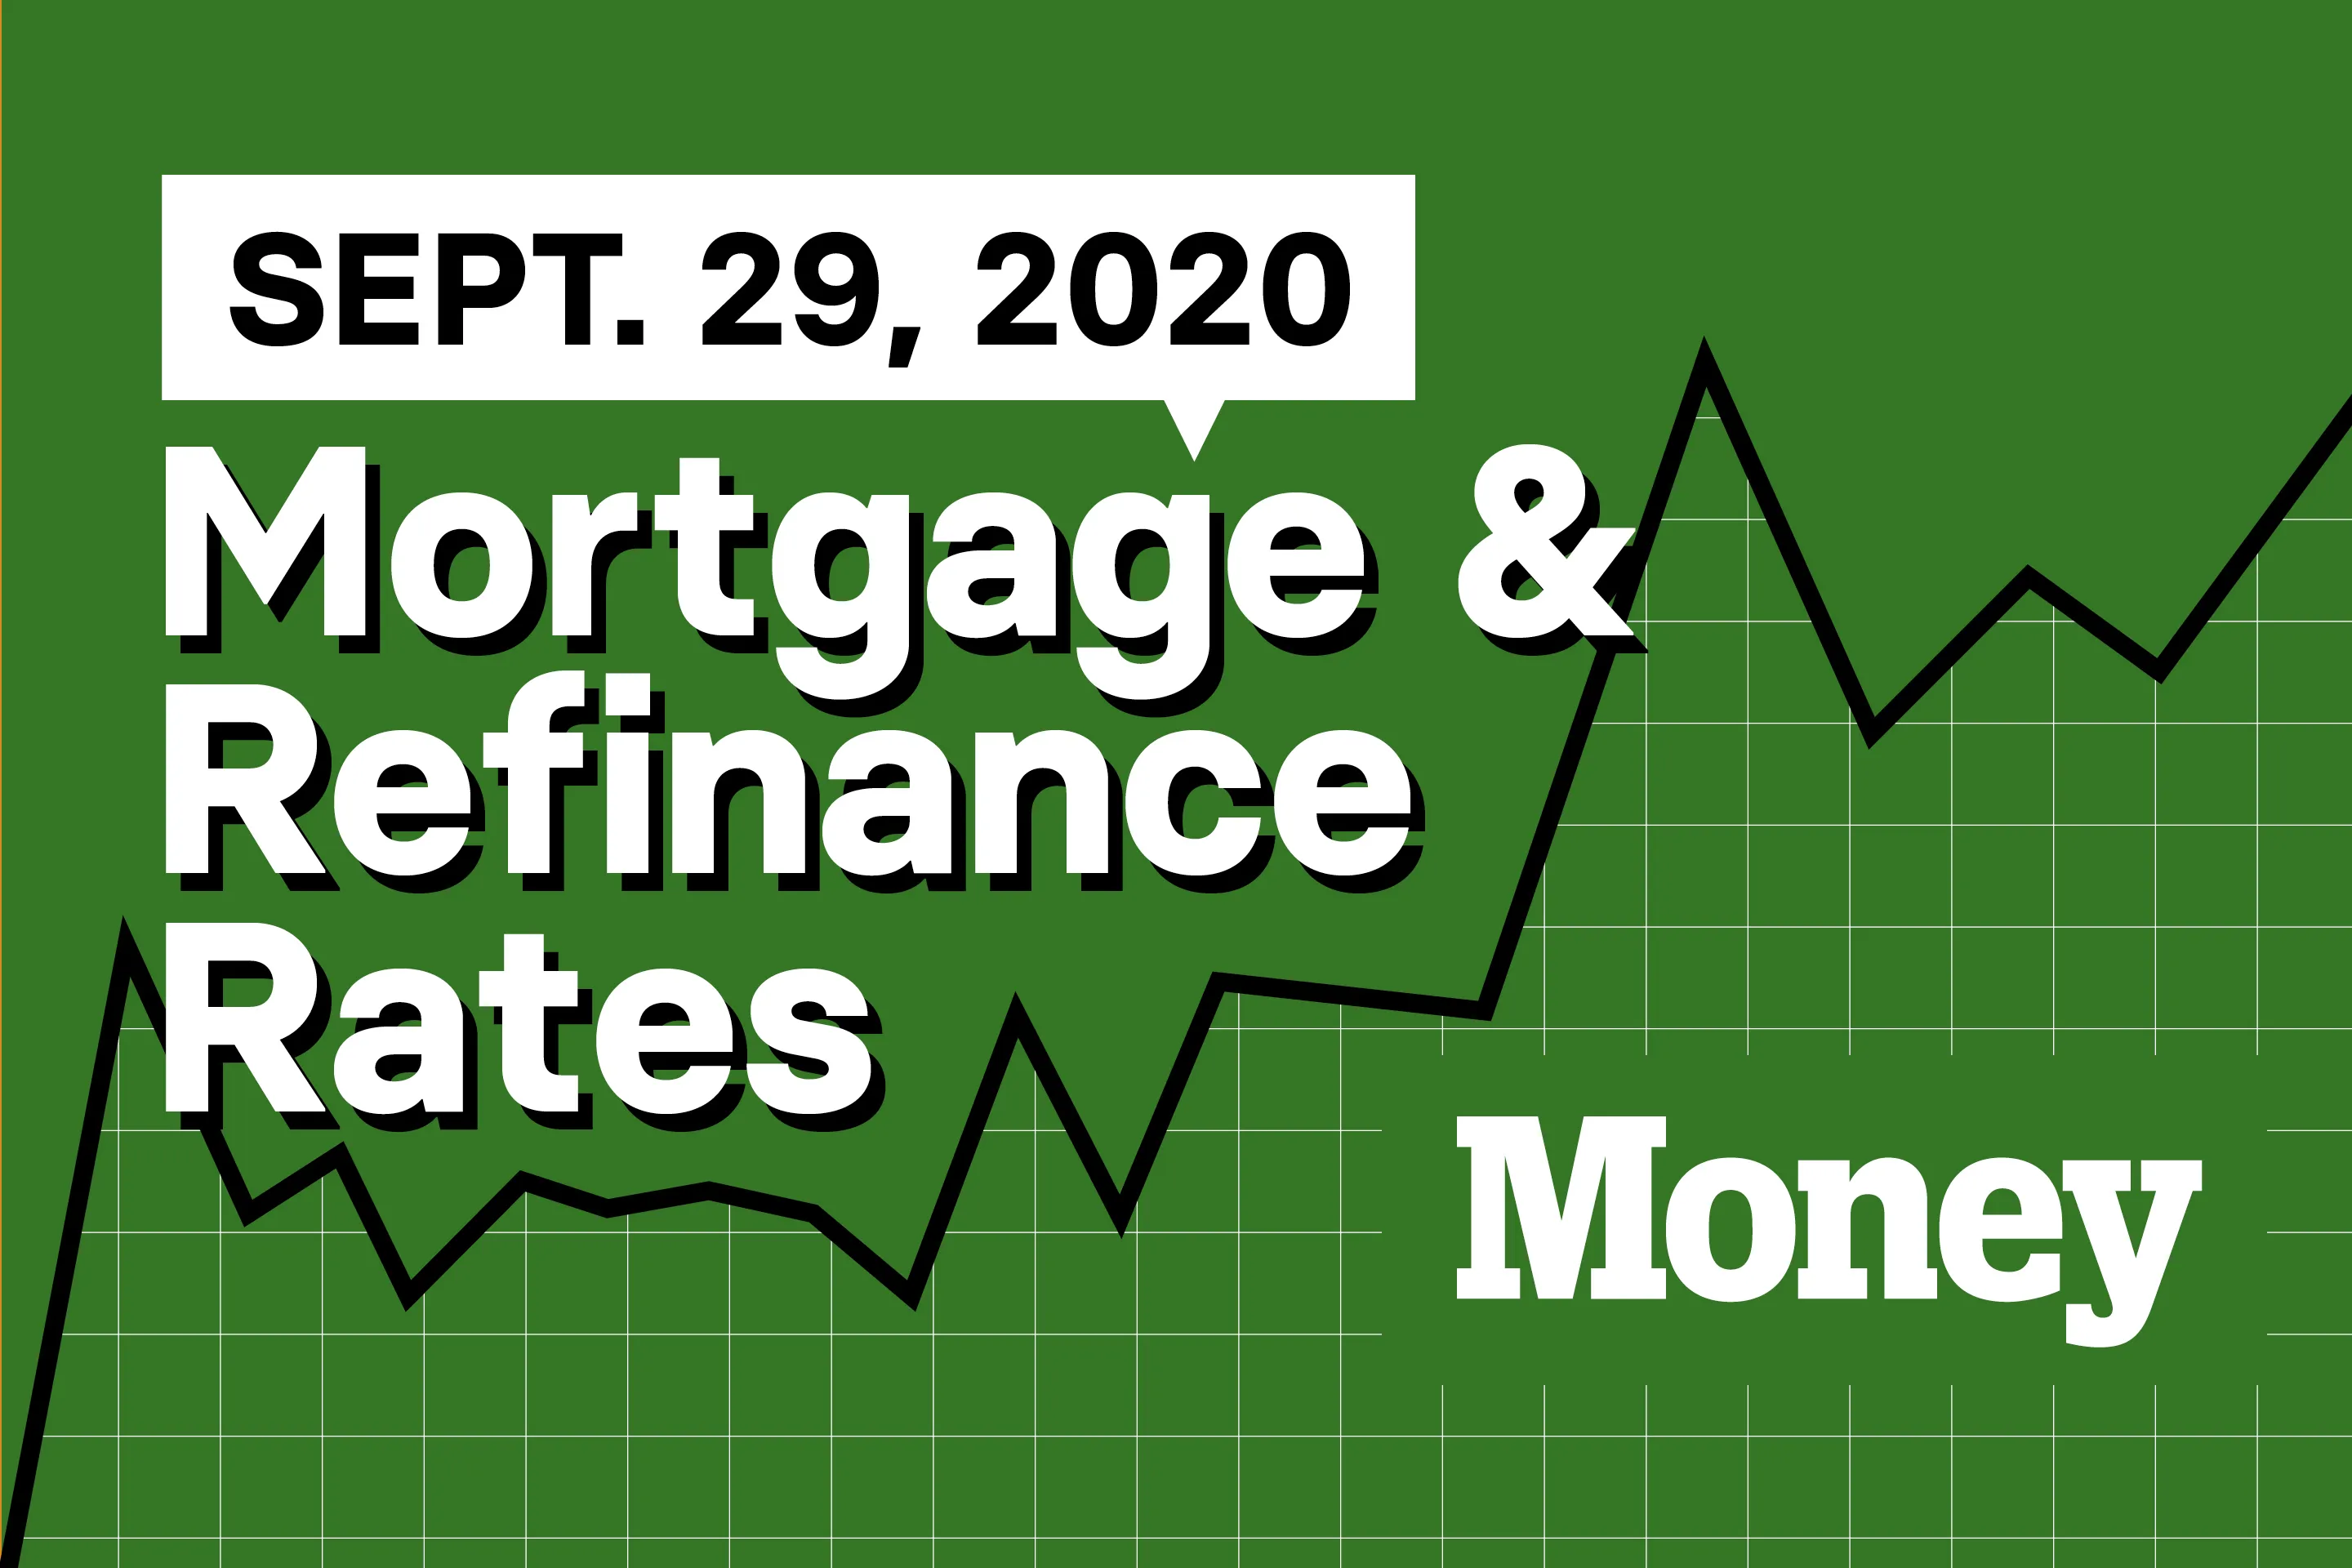 Here Are Today's Best Mortgage & Refinance Rates for September 29, 2020